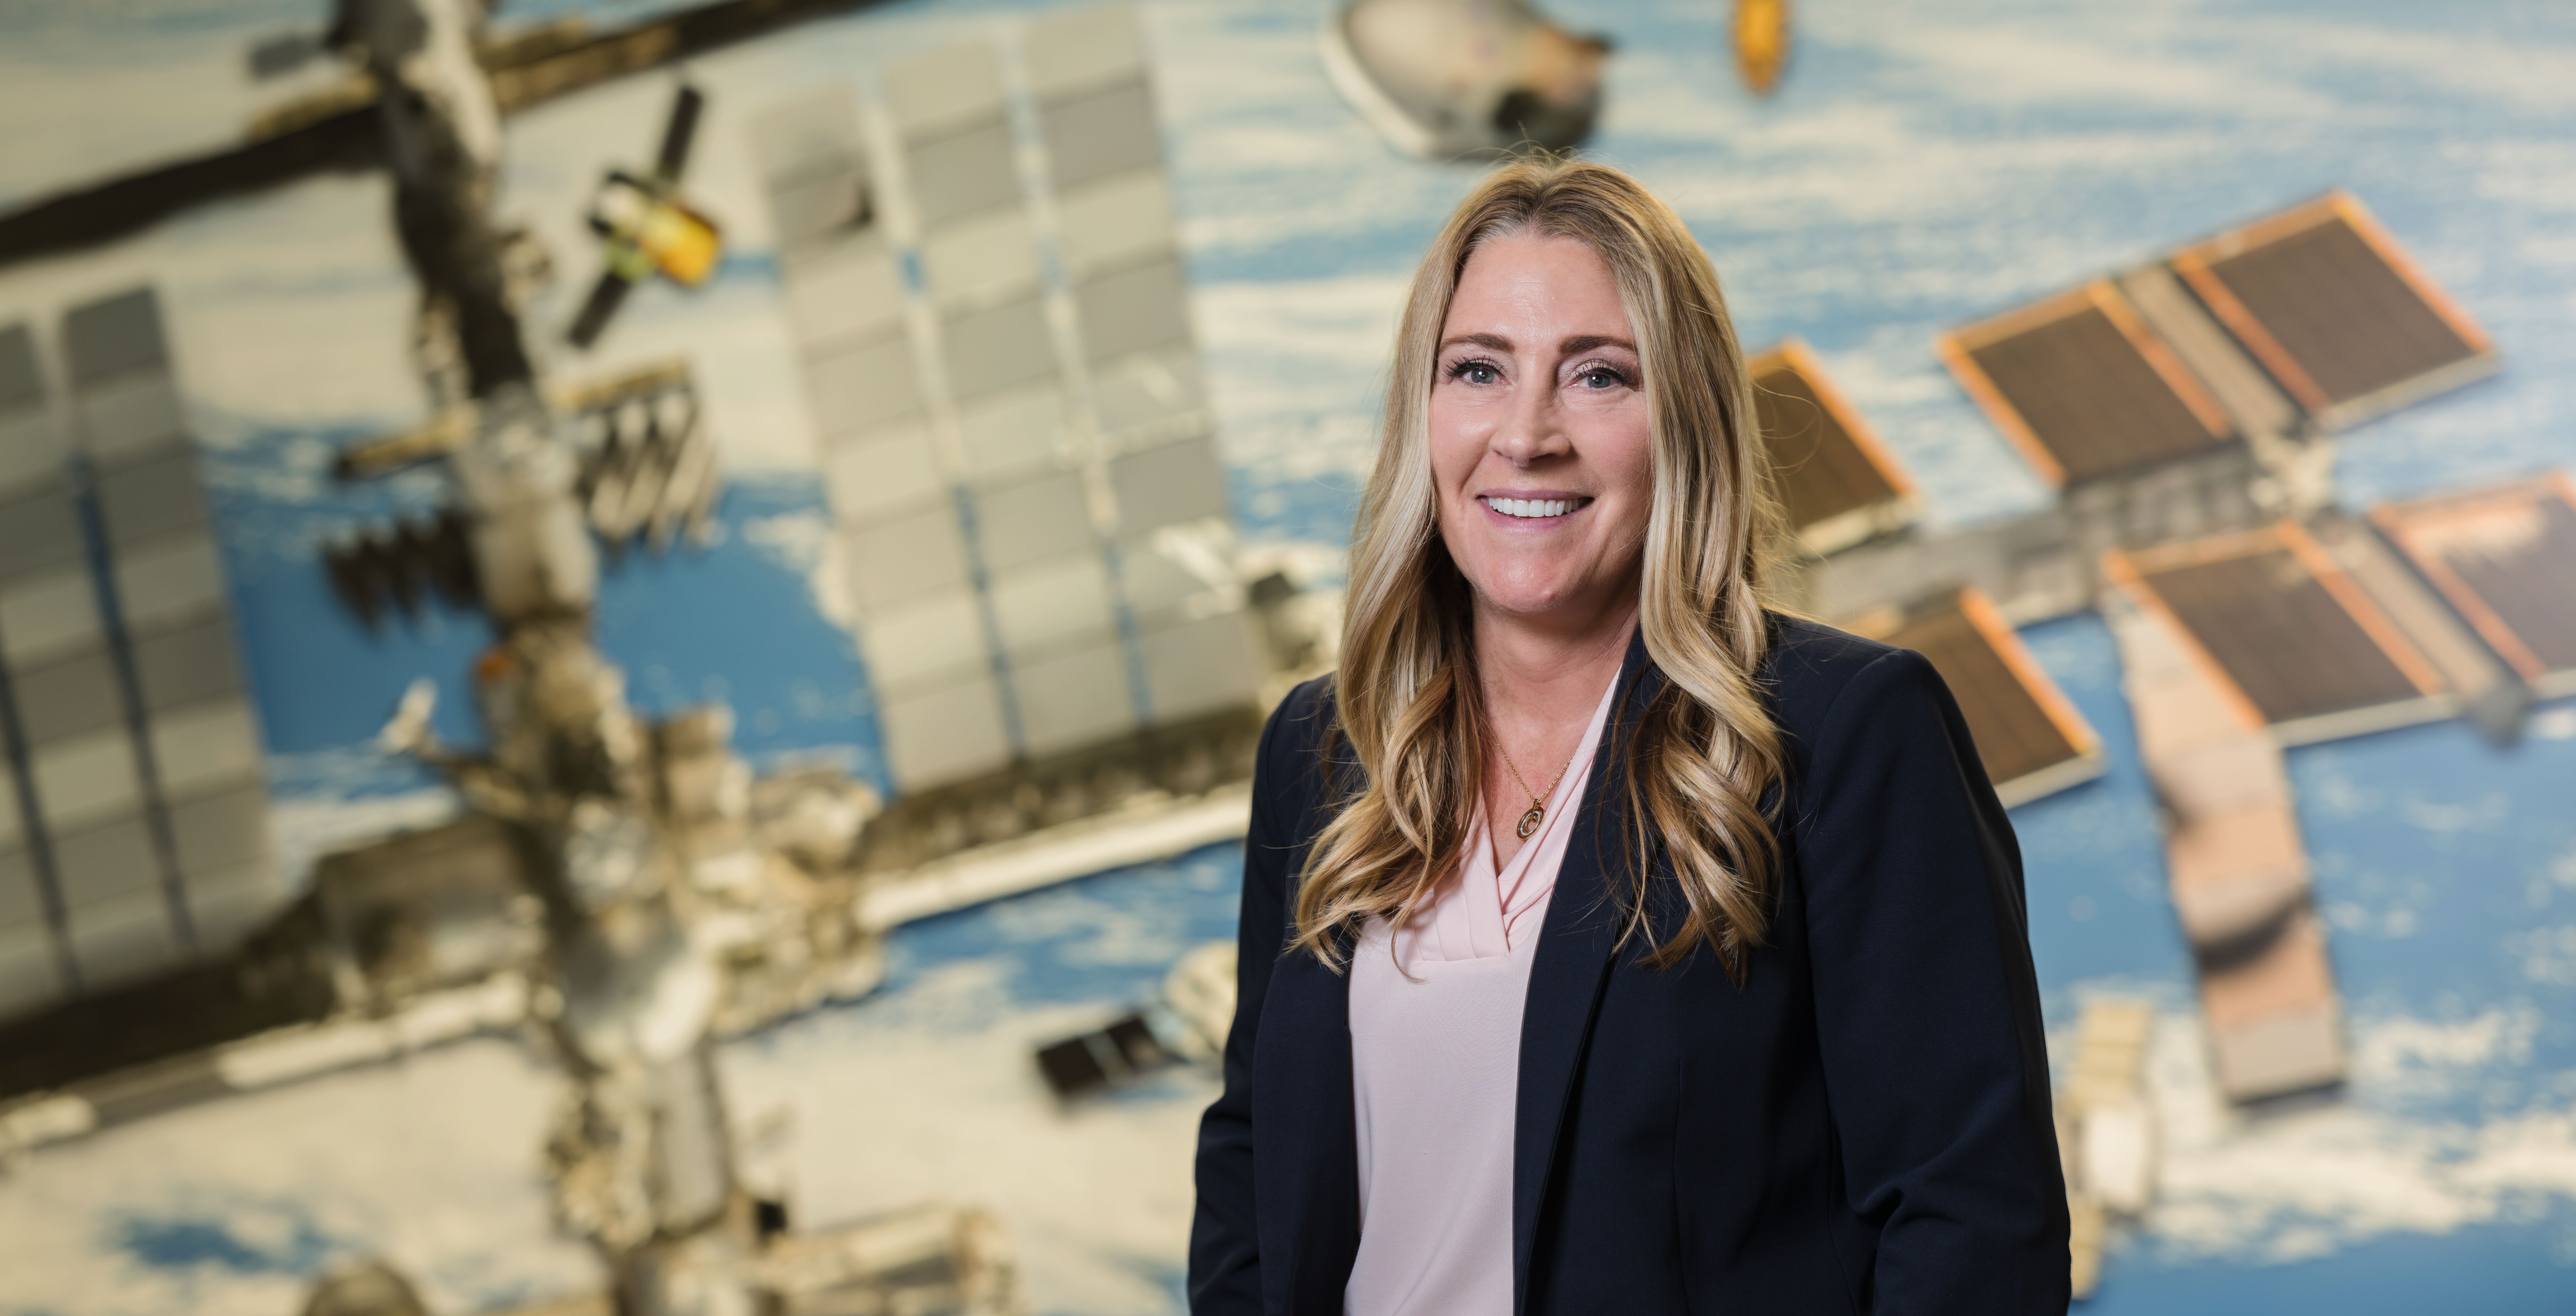 Dana Weigel stands and smiles in front of a large wall mural of the International Space Station. She has wavy blond hair and is wearing a dark blue jacket over a pink blouse with a circular necklace around her neck.